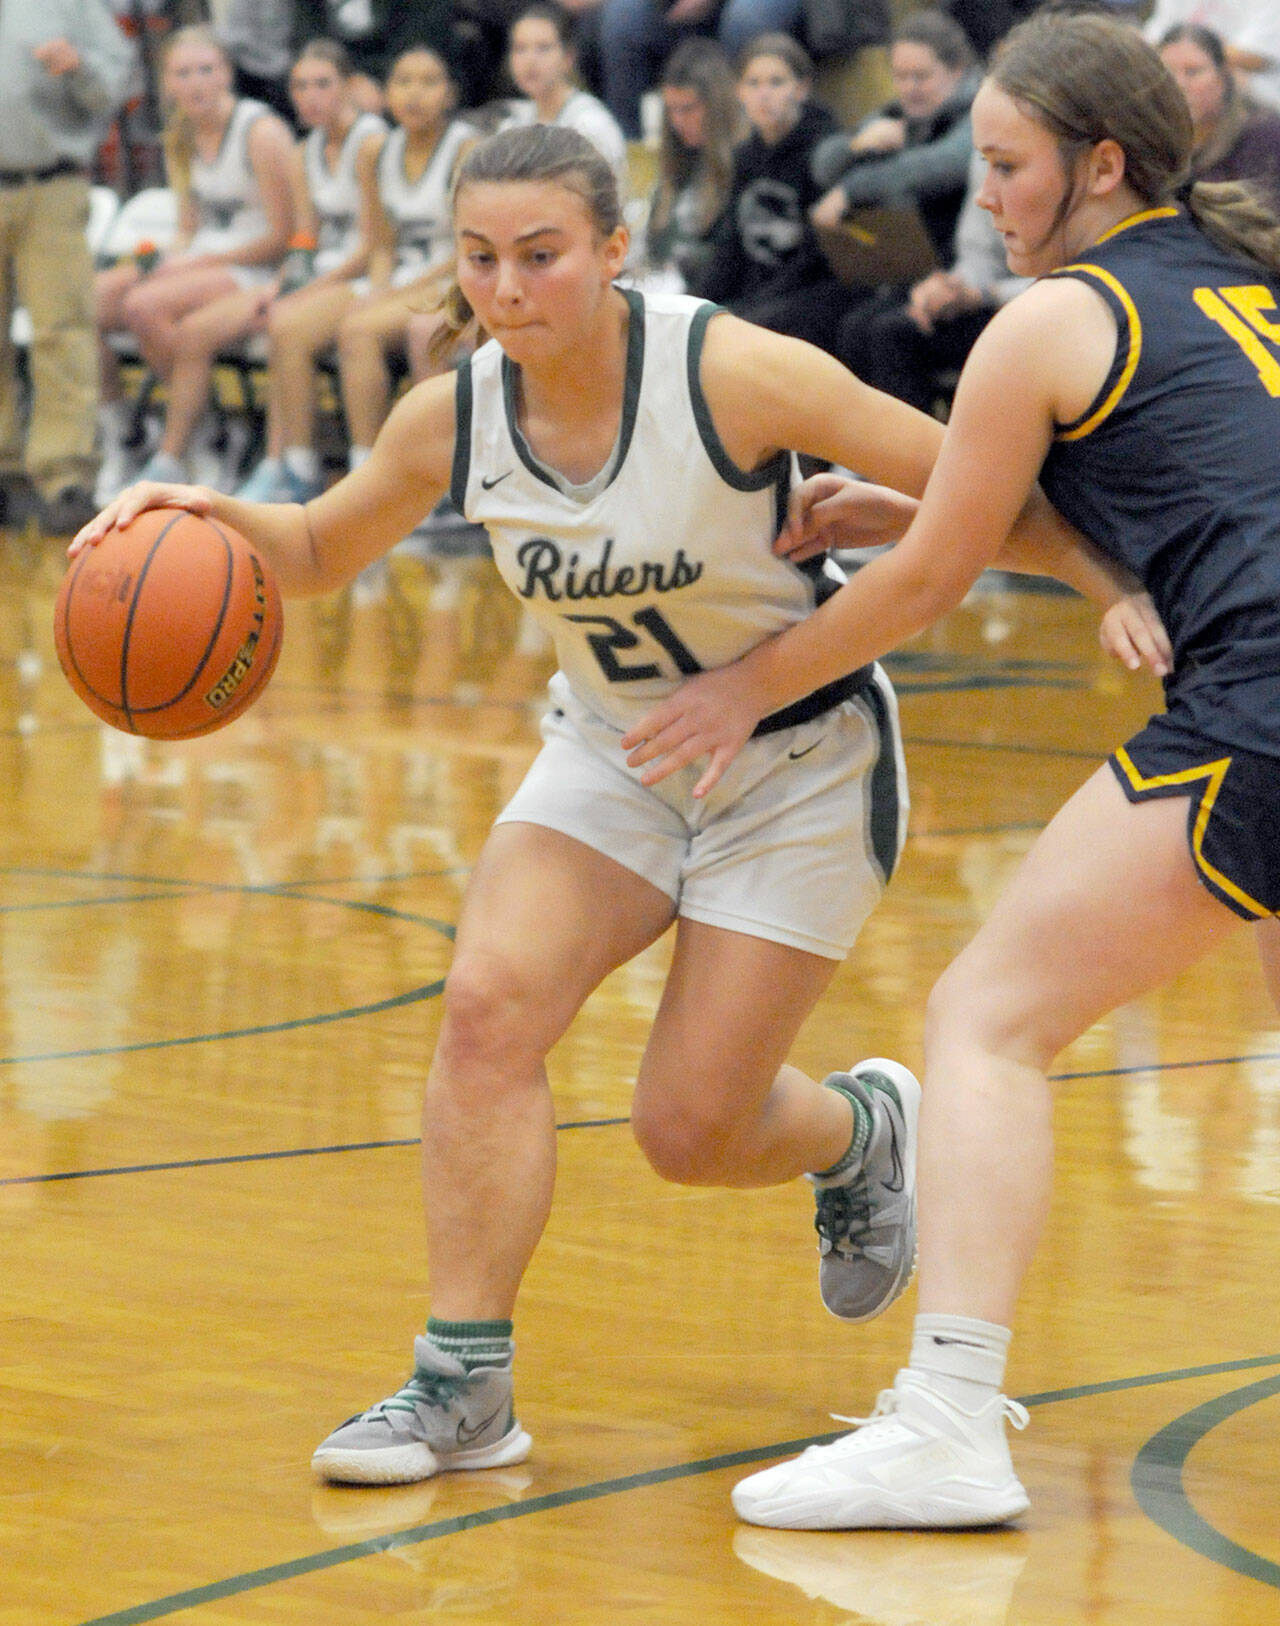 KEITH THORPE/PENINSULA DAILY NEWS Port Angeles’ Kennedy Rognlien, left, slips around Forks’ Fynlie Peters on Tuesday night at Port Angeles High School.